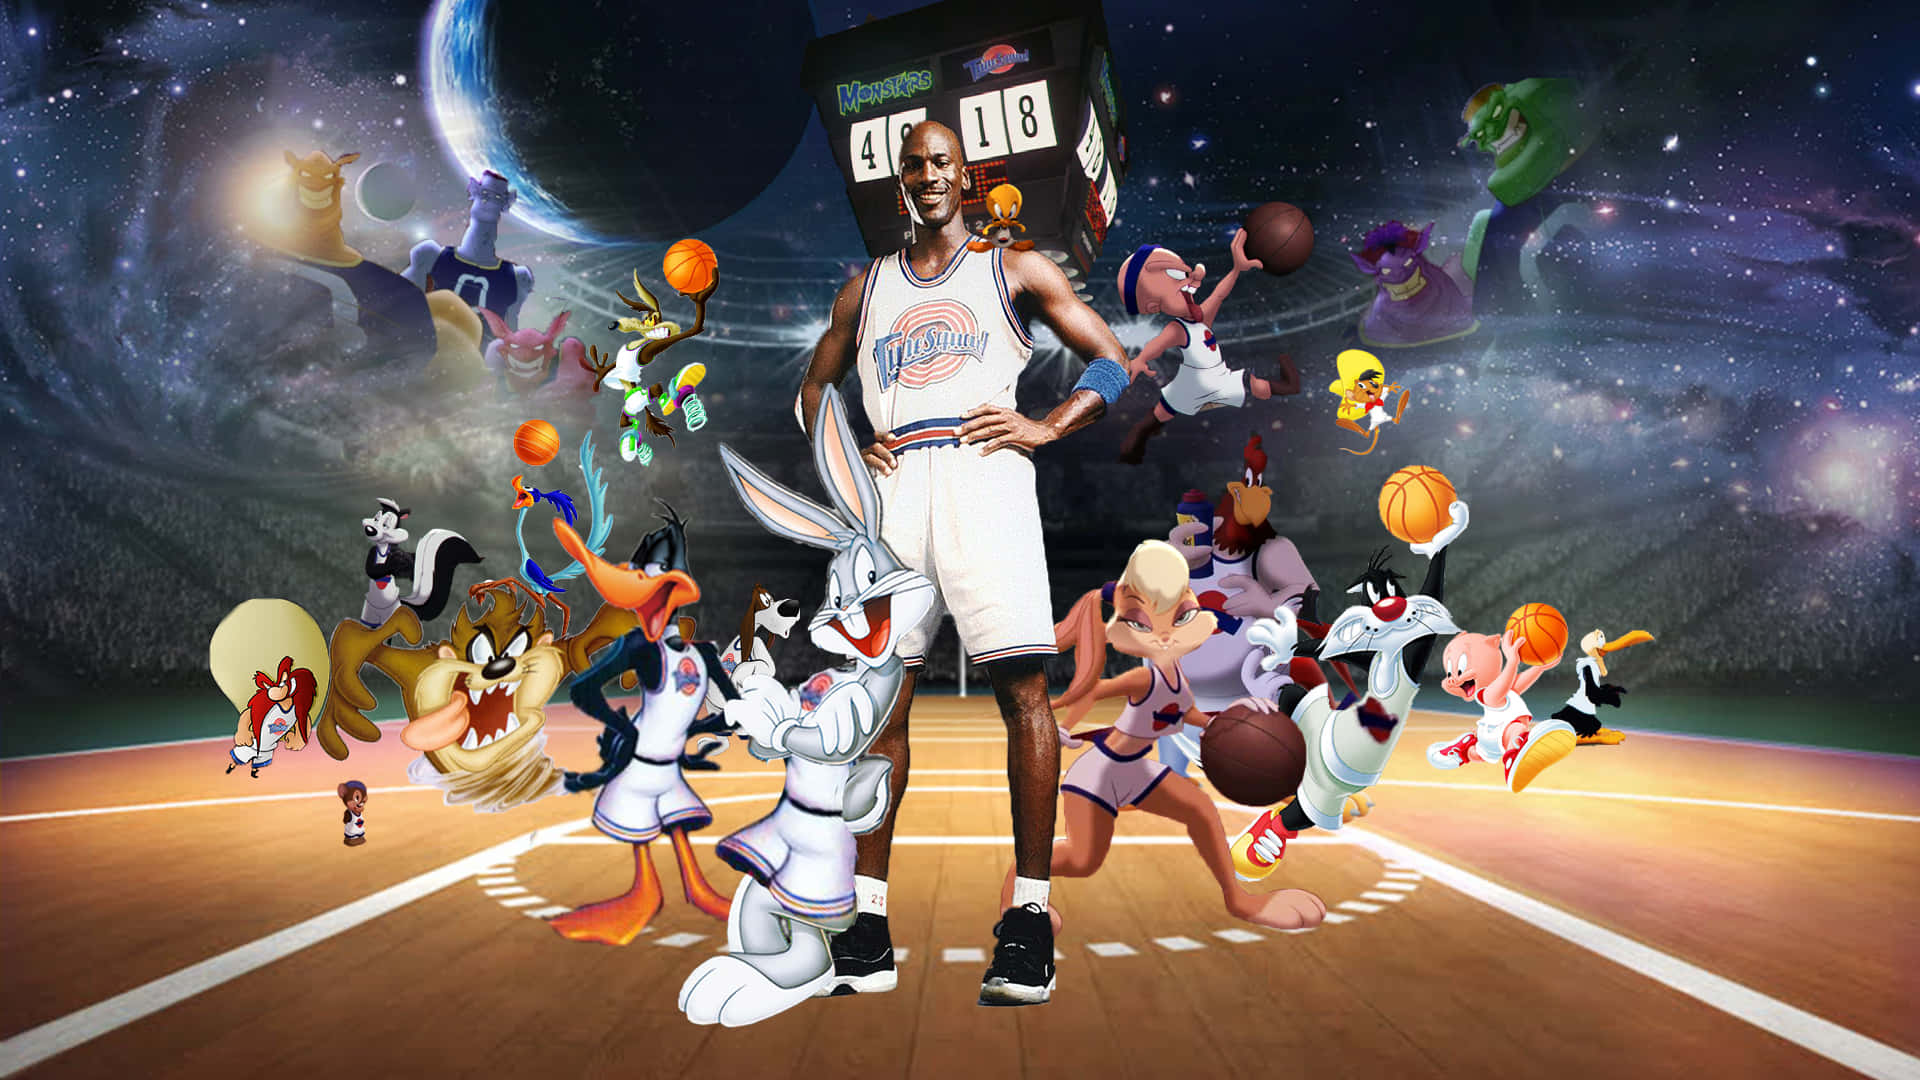 Cool Space Jam Background Wallpaper